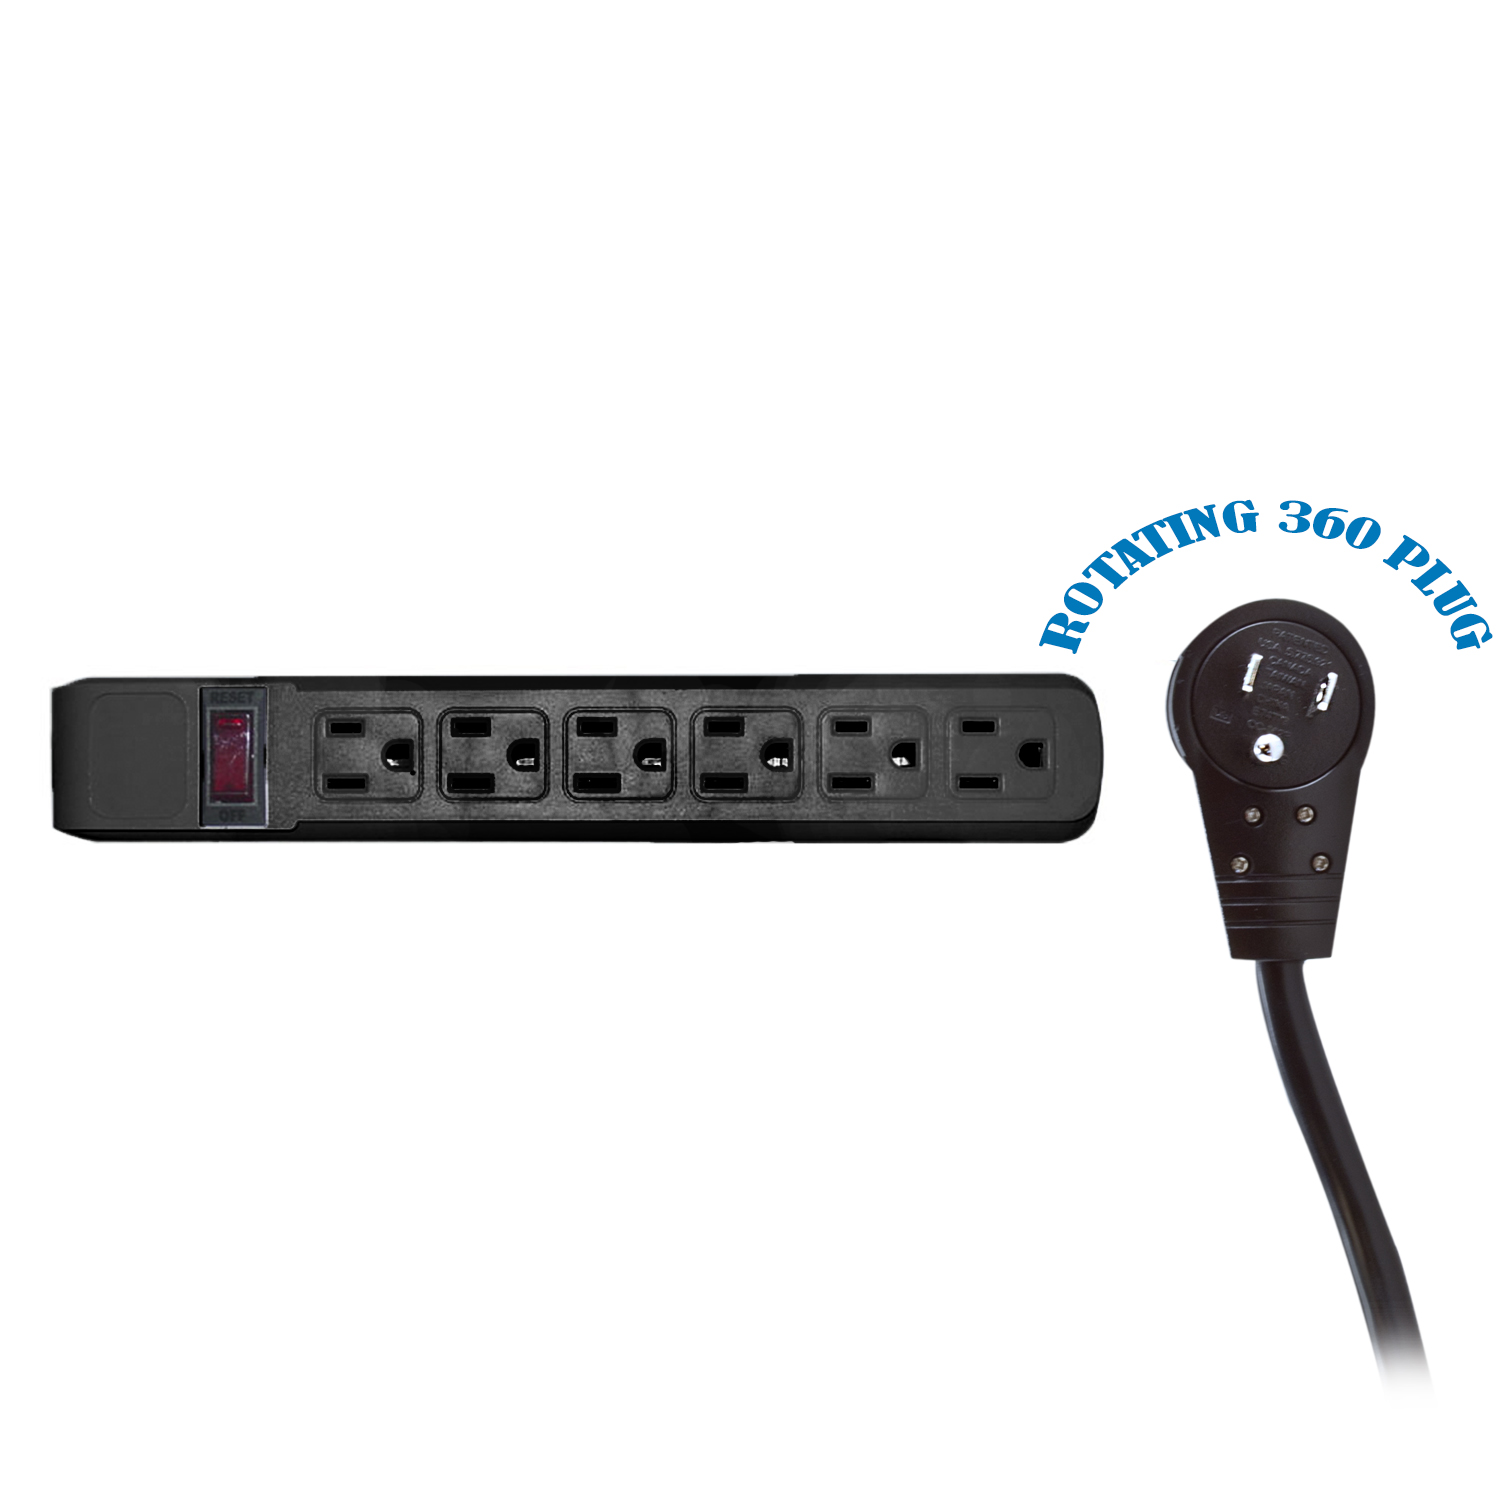 Surge Protector, Flat Rotating Plug, 6 Outlet, Black 10 FT CORD - Click Image to Close